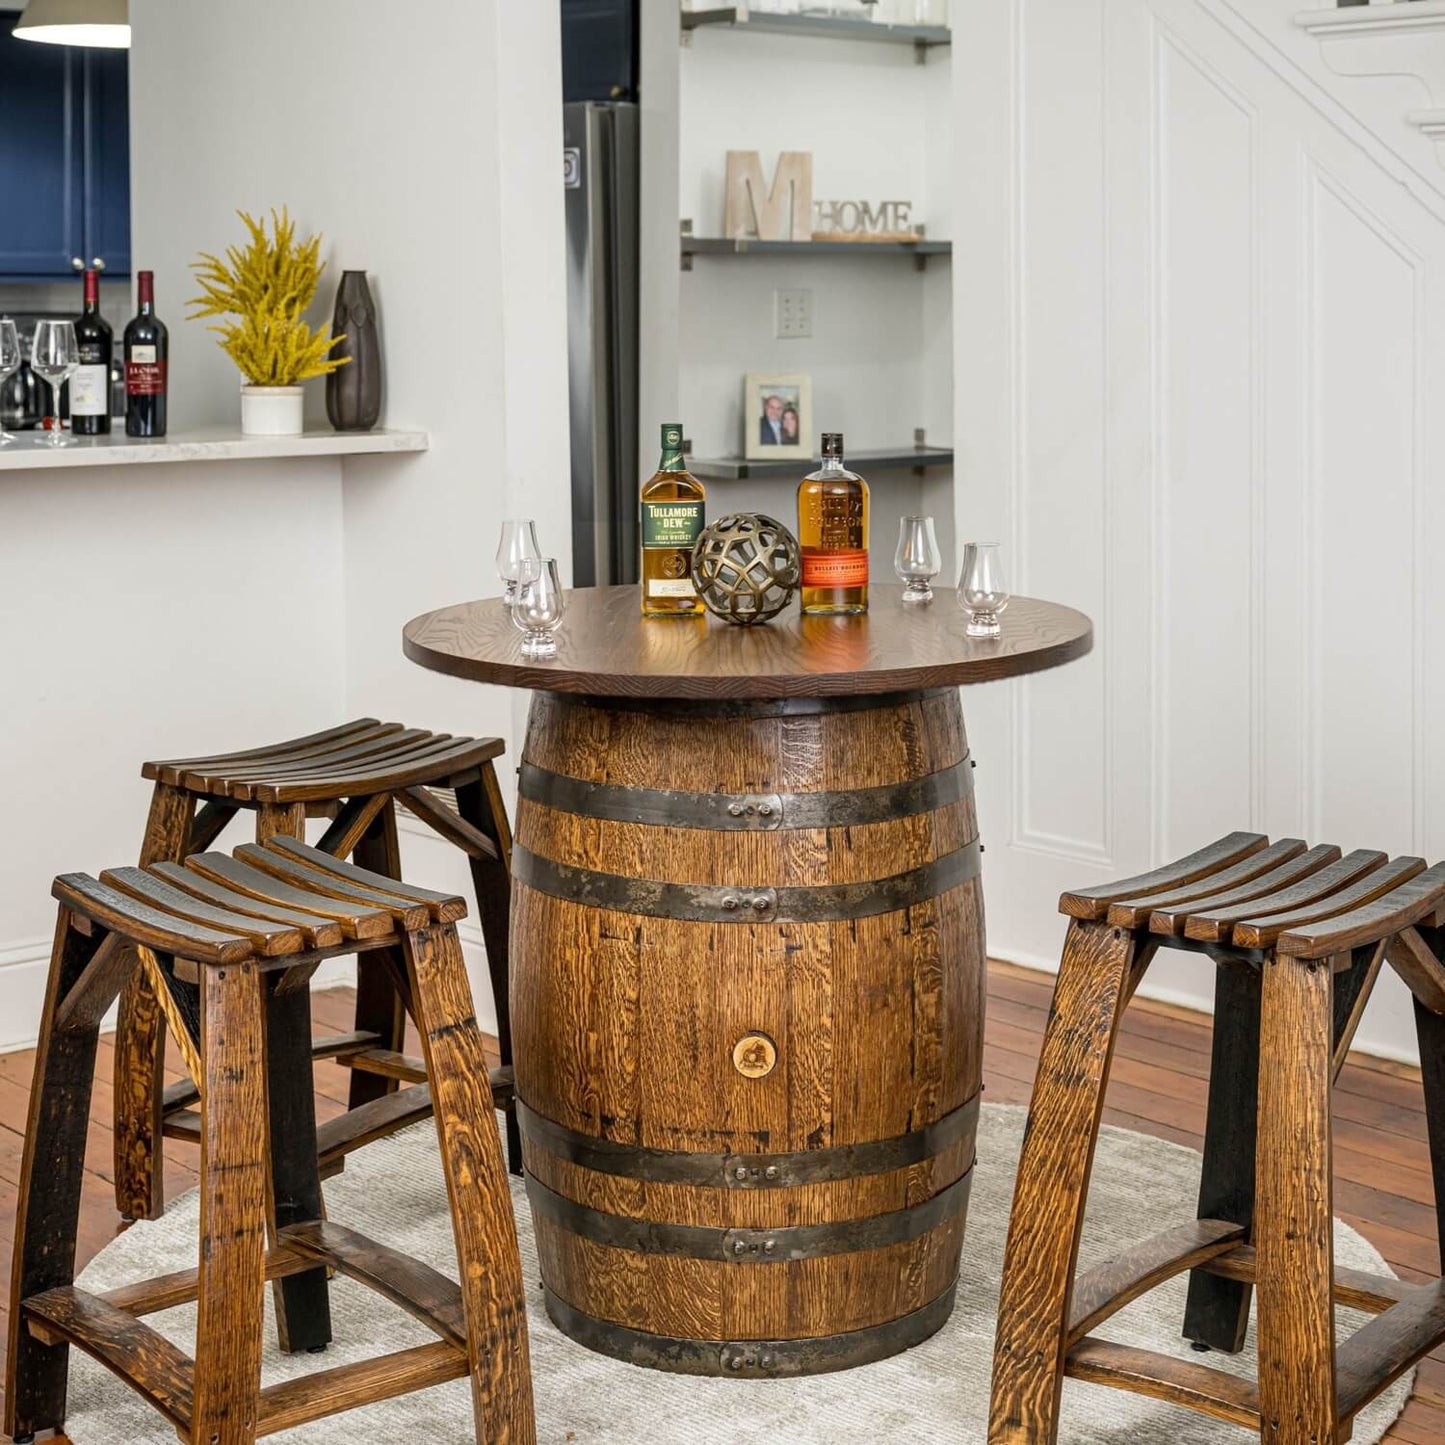 Standard Whiskey Barrel Pub Table w/ 36" or 48" Table Top